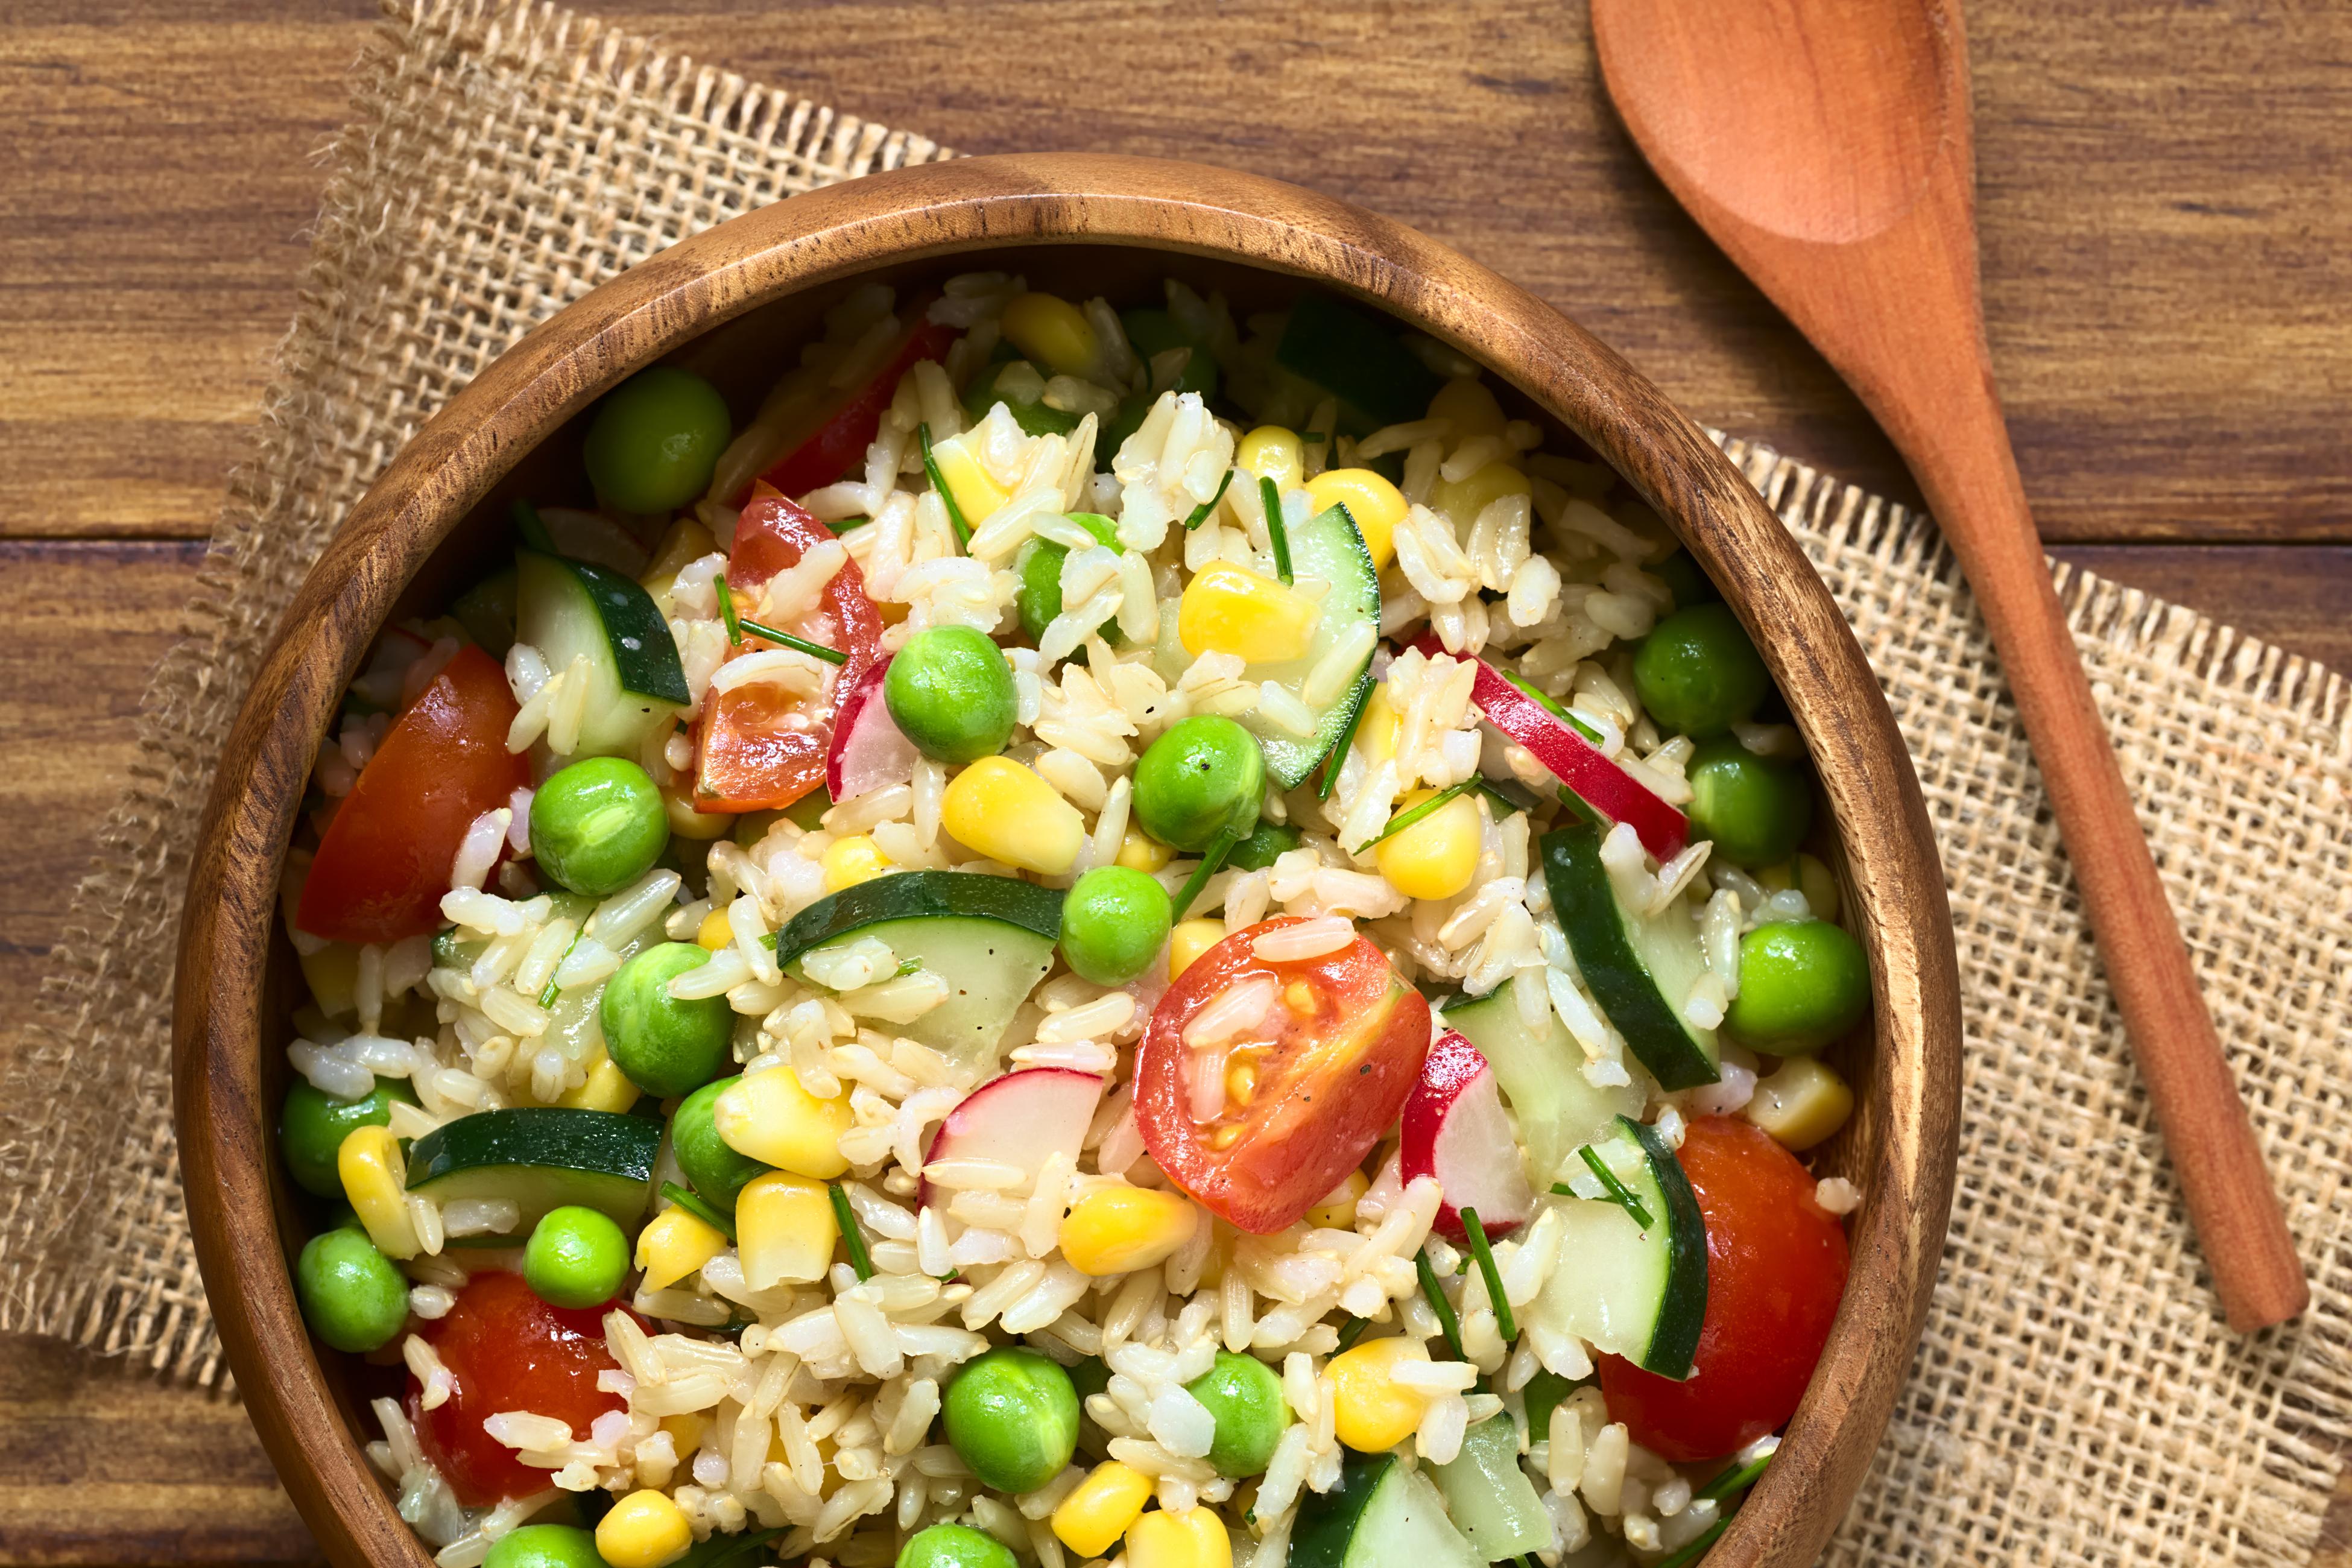 Rice dish with cucumbers, peas, corn, and tomatoes in a wooden bowl (Shutterstock -- LW rights)